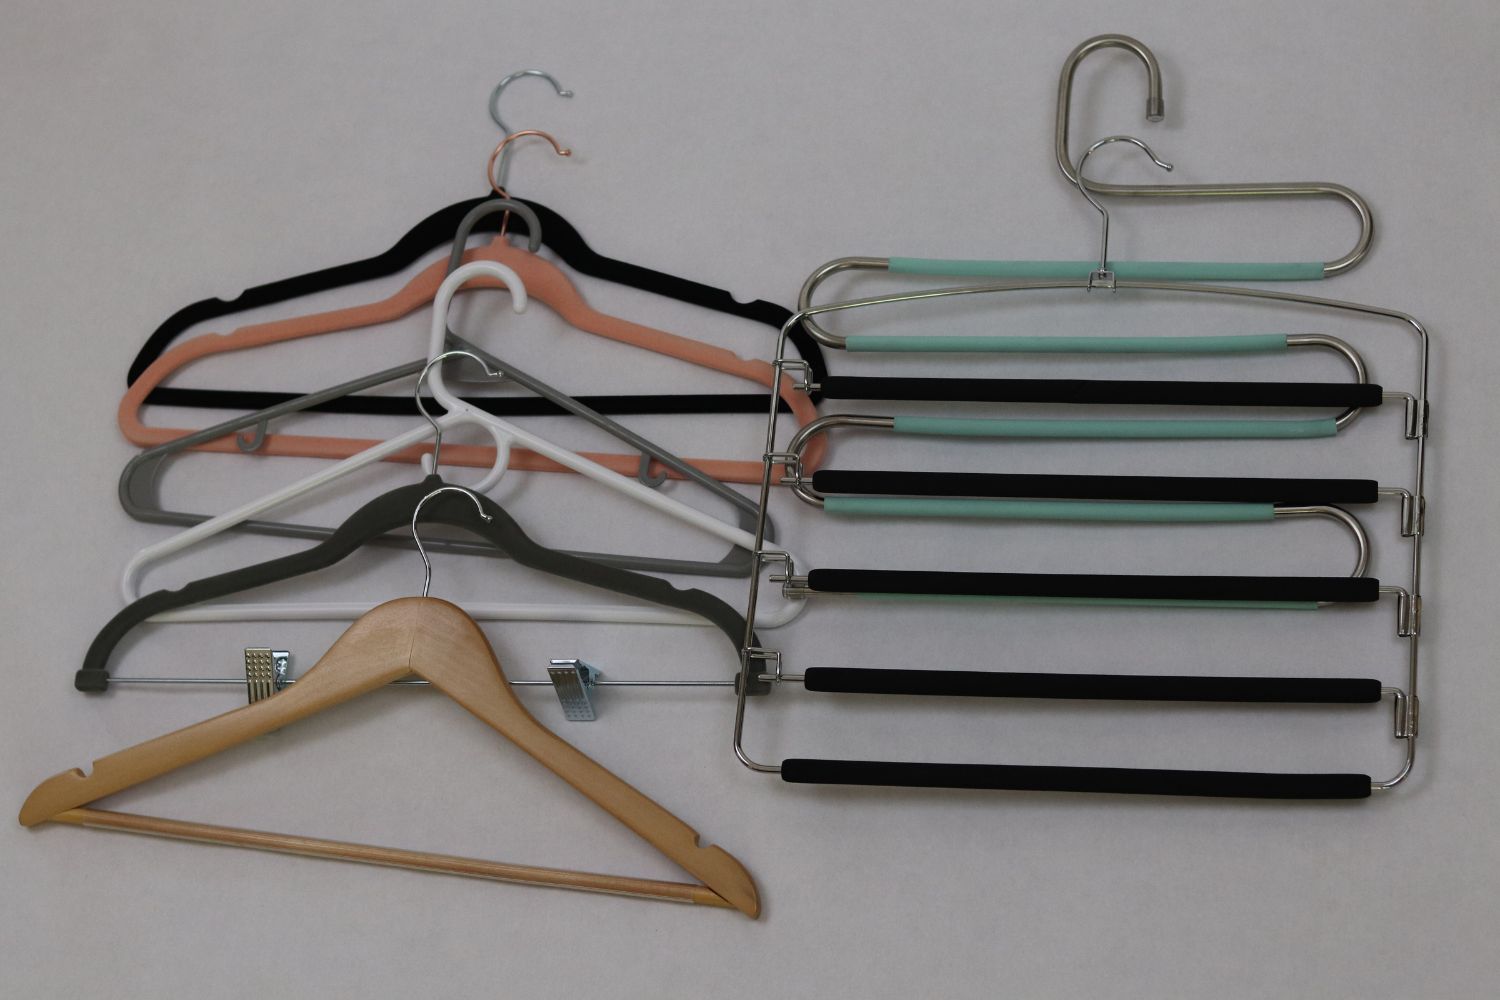 The Best Hangers - Tested by Bob Vila